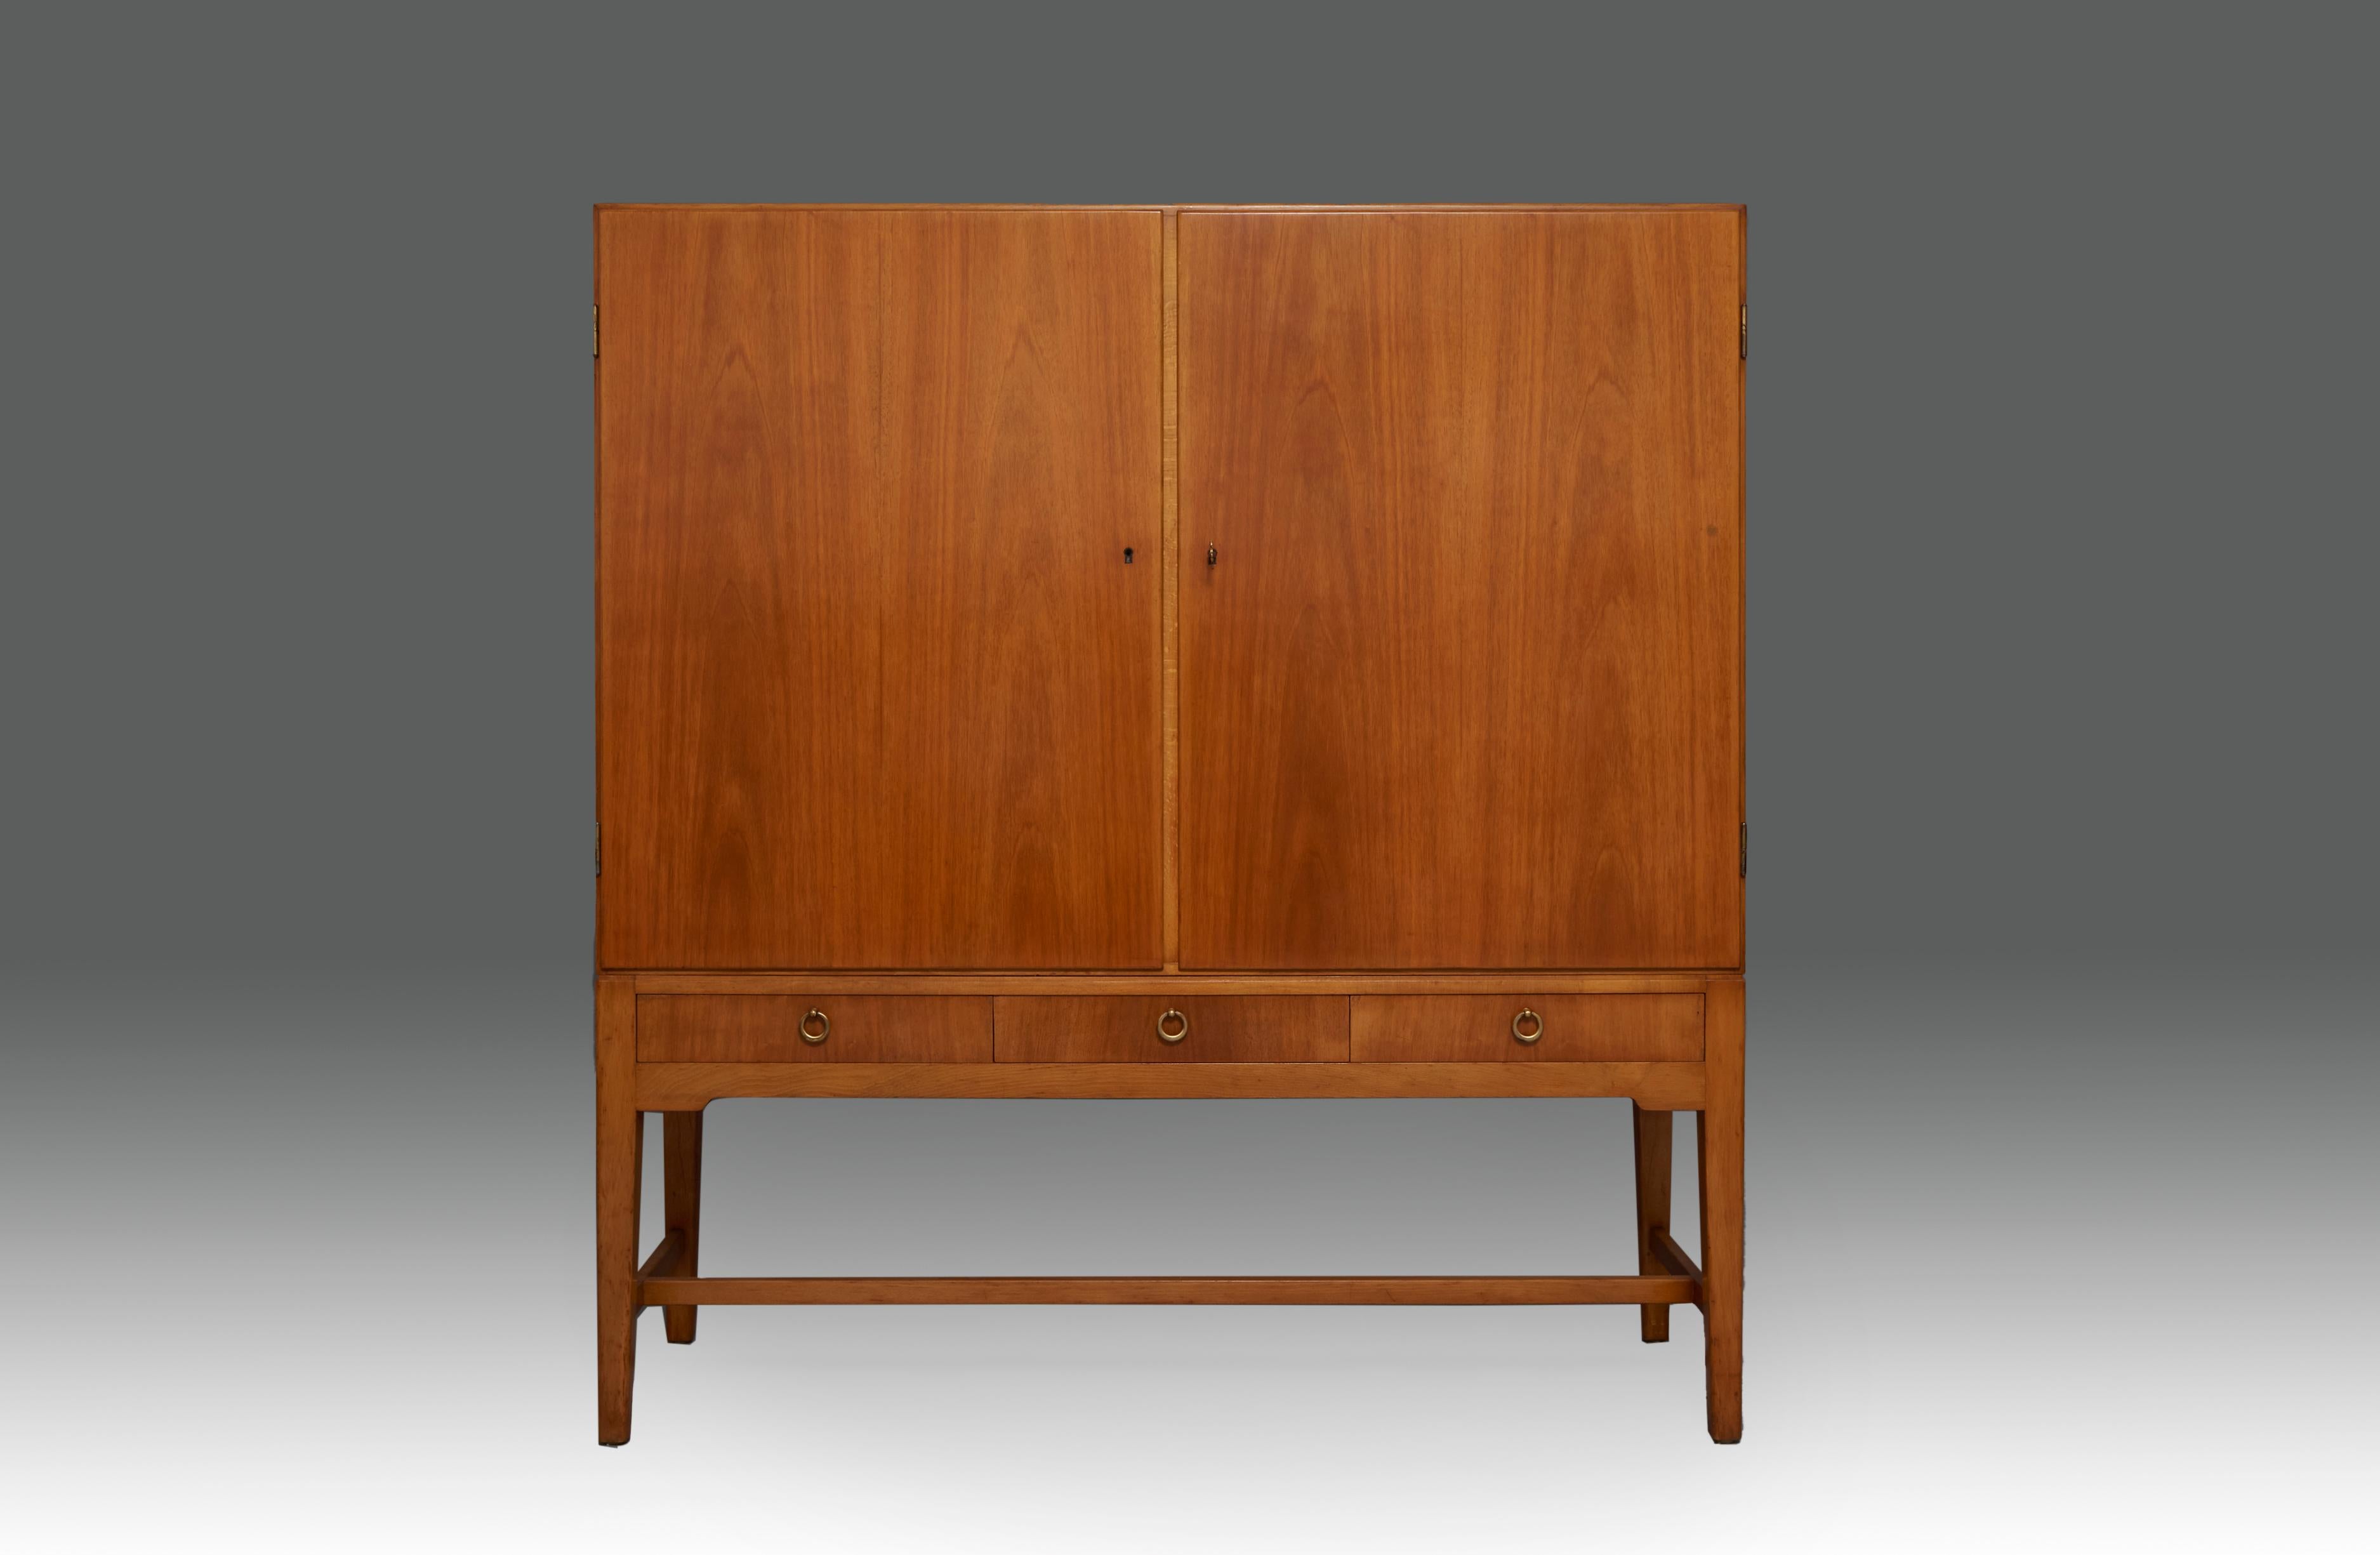 Cabinet produced by the swedish company Holmström & Johansson A.B. Norrköpping. Sweden, late 1940’s, Beginning 1950’s. 

It is constructed in two volumes consisting on a set of drawers and shelves. The design of this piece aims for simplicity,